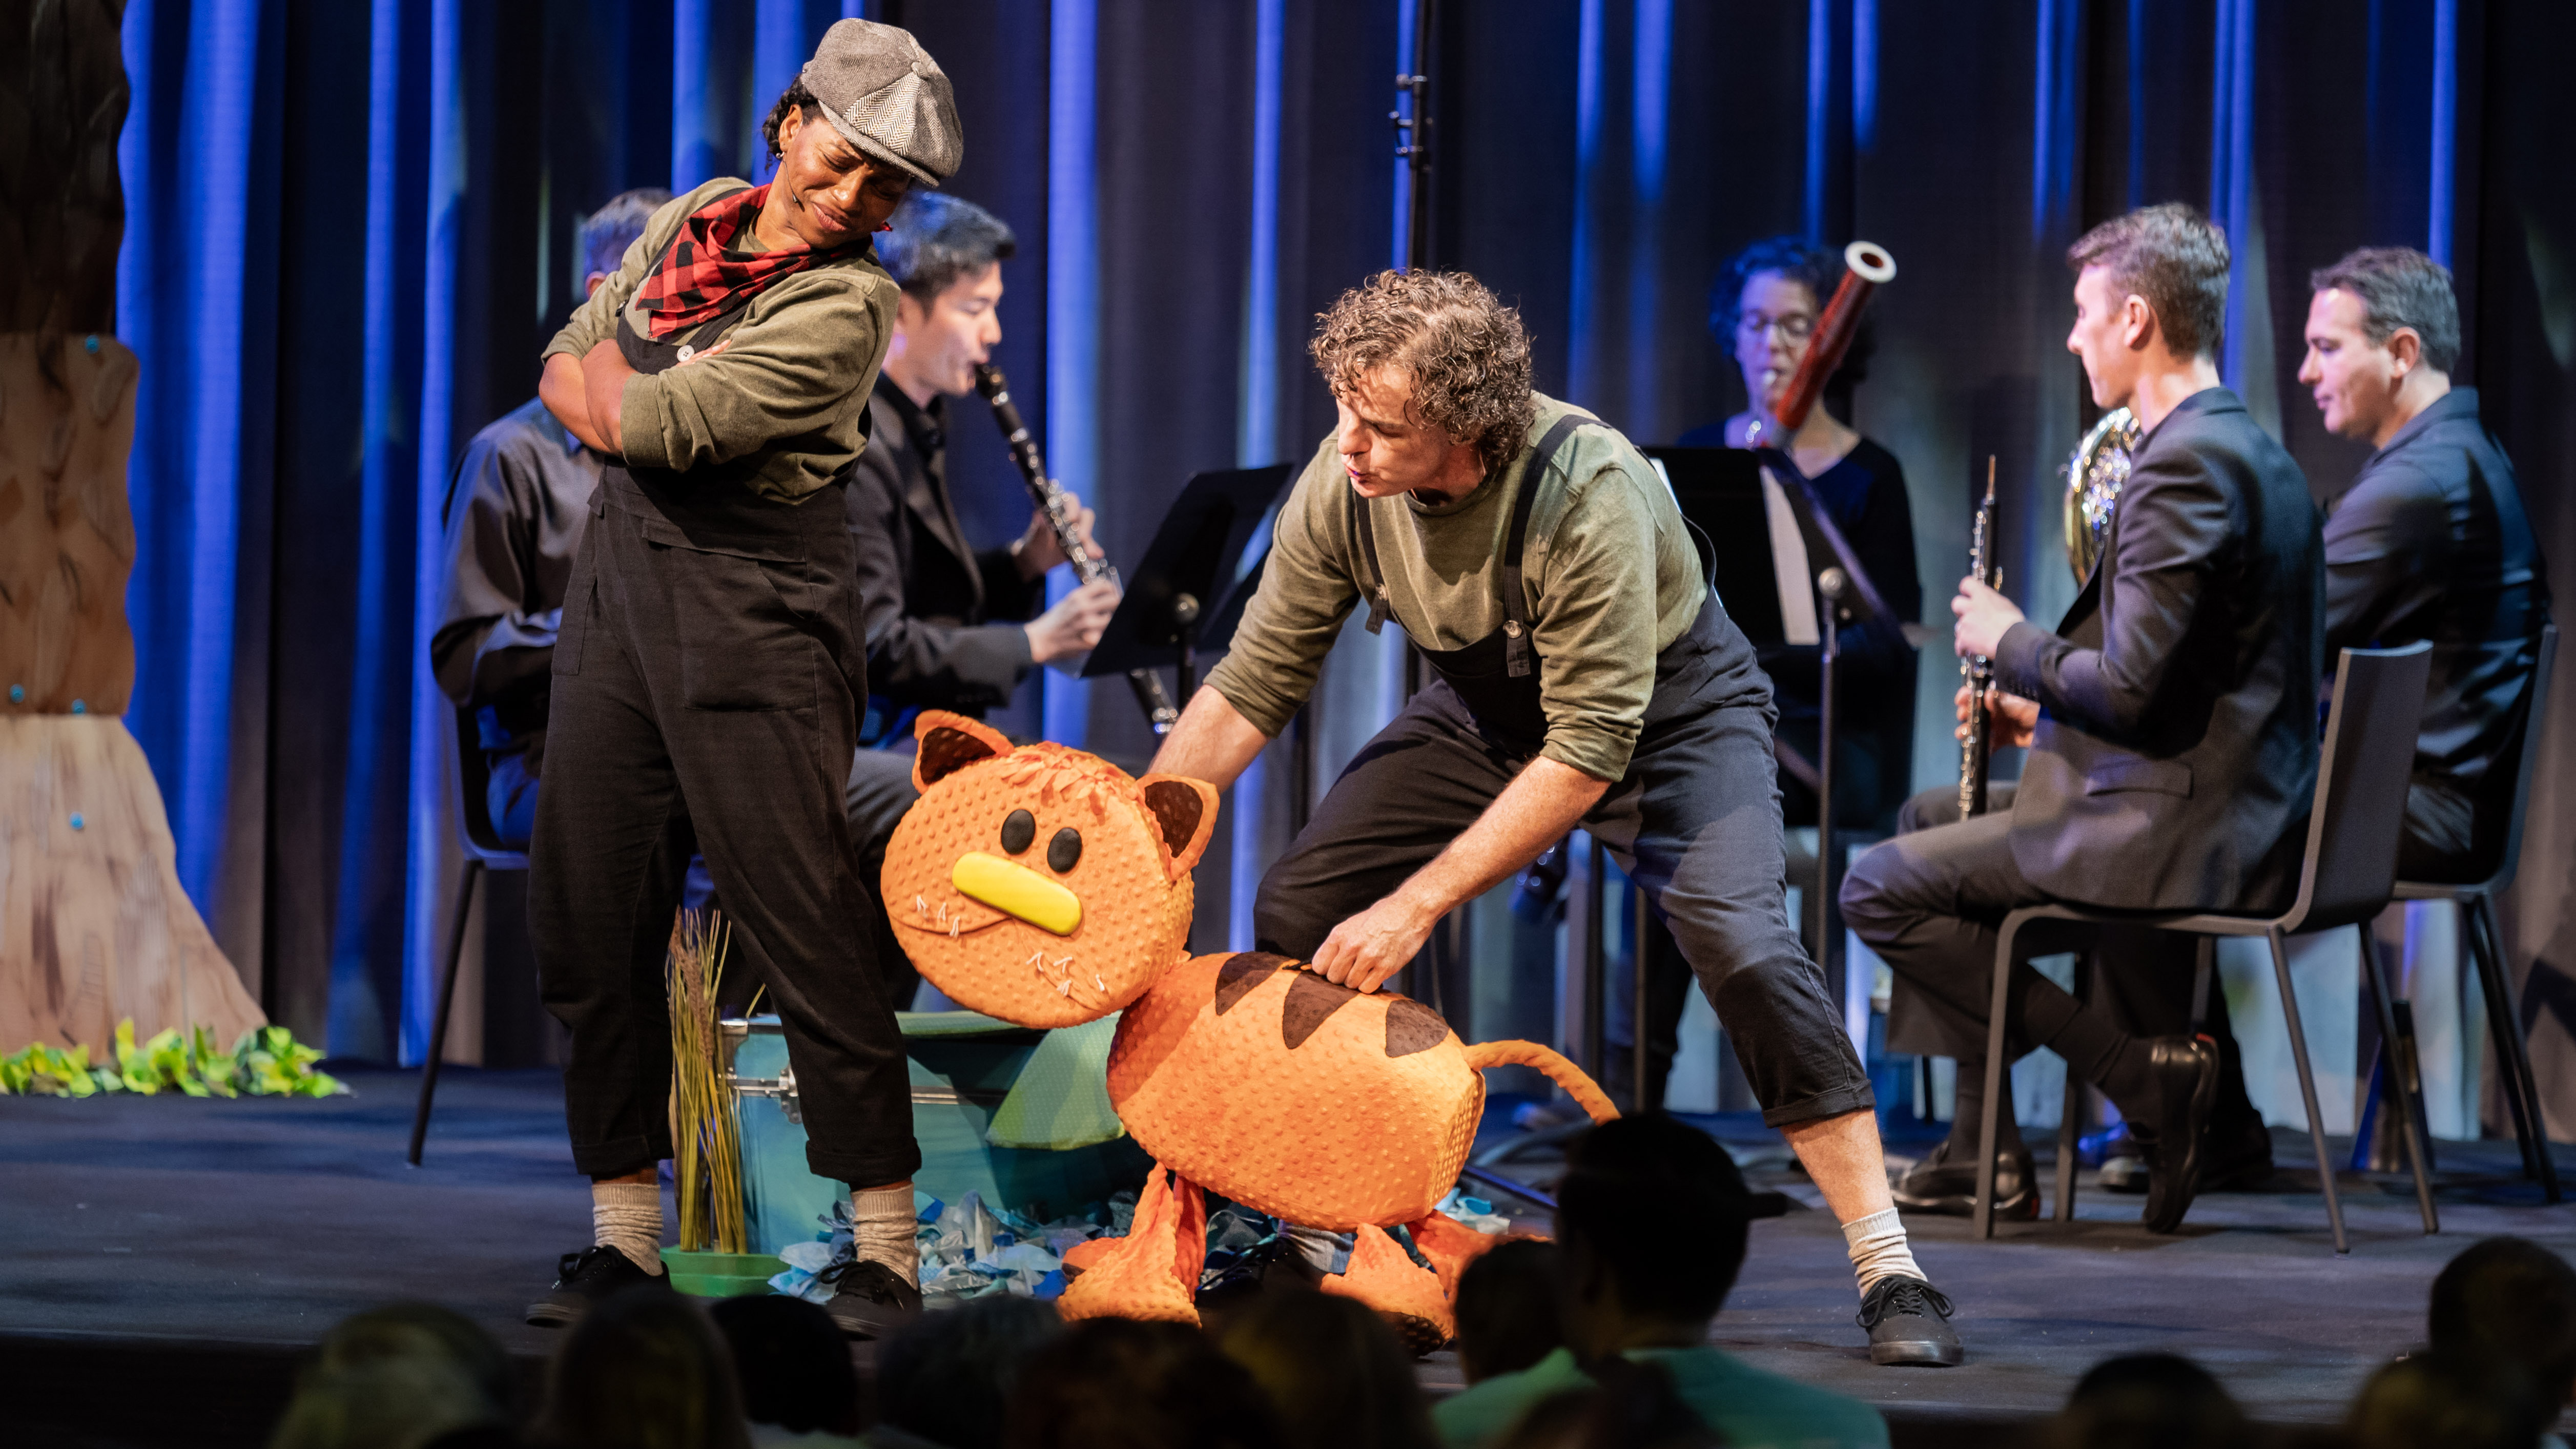 Two actors in dark green shirts and black overalls perform in front of an audience of children and adults. The standing performer wears a black hat and red-and-black plaid neck scarf, arms crossed while looking down at Cat. The crouching performer controls the Cat puppet, which is orange with brown stripes and a yellow nose. Five musicians in all-black outfits sit on chairs in a semi-circle behind the performers while playing instruments.